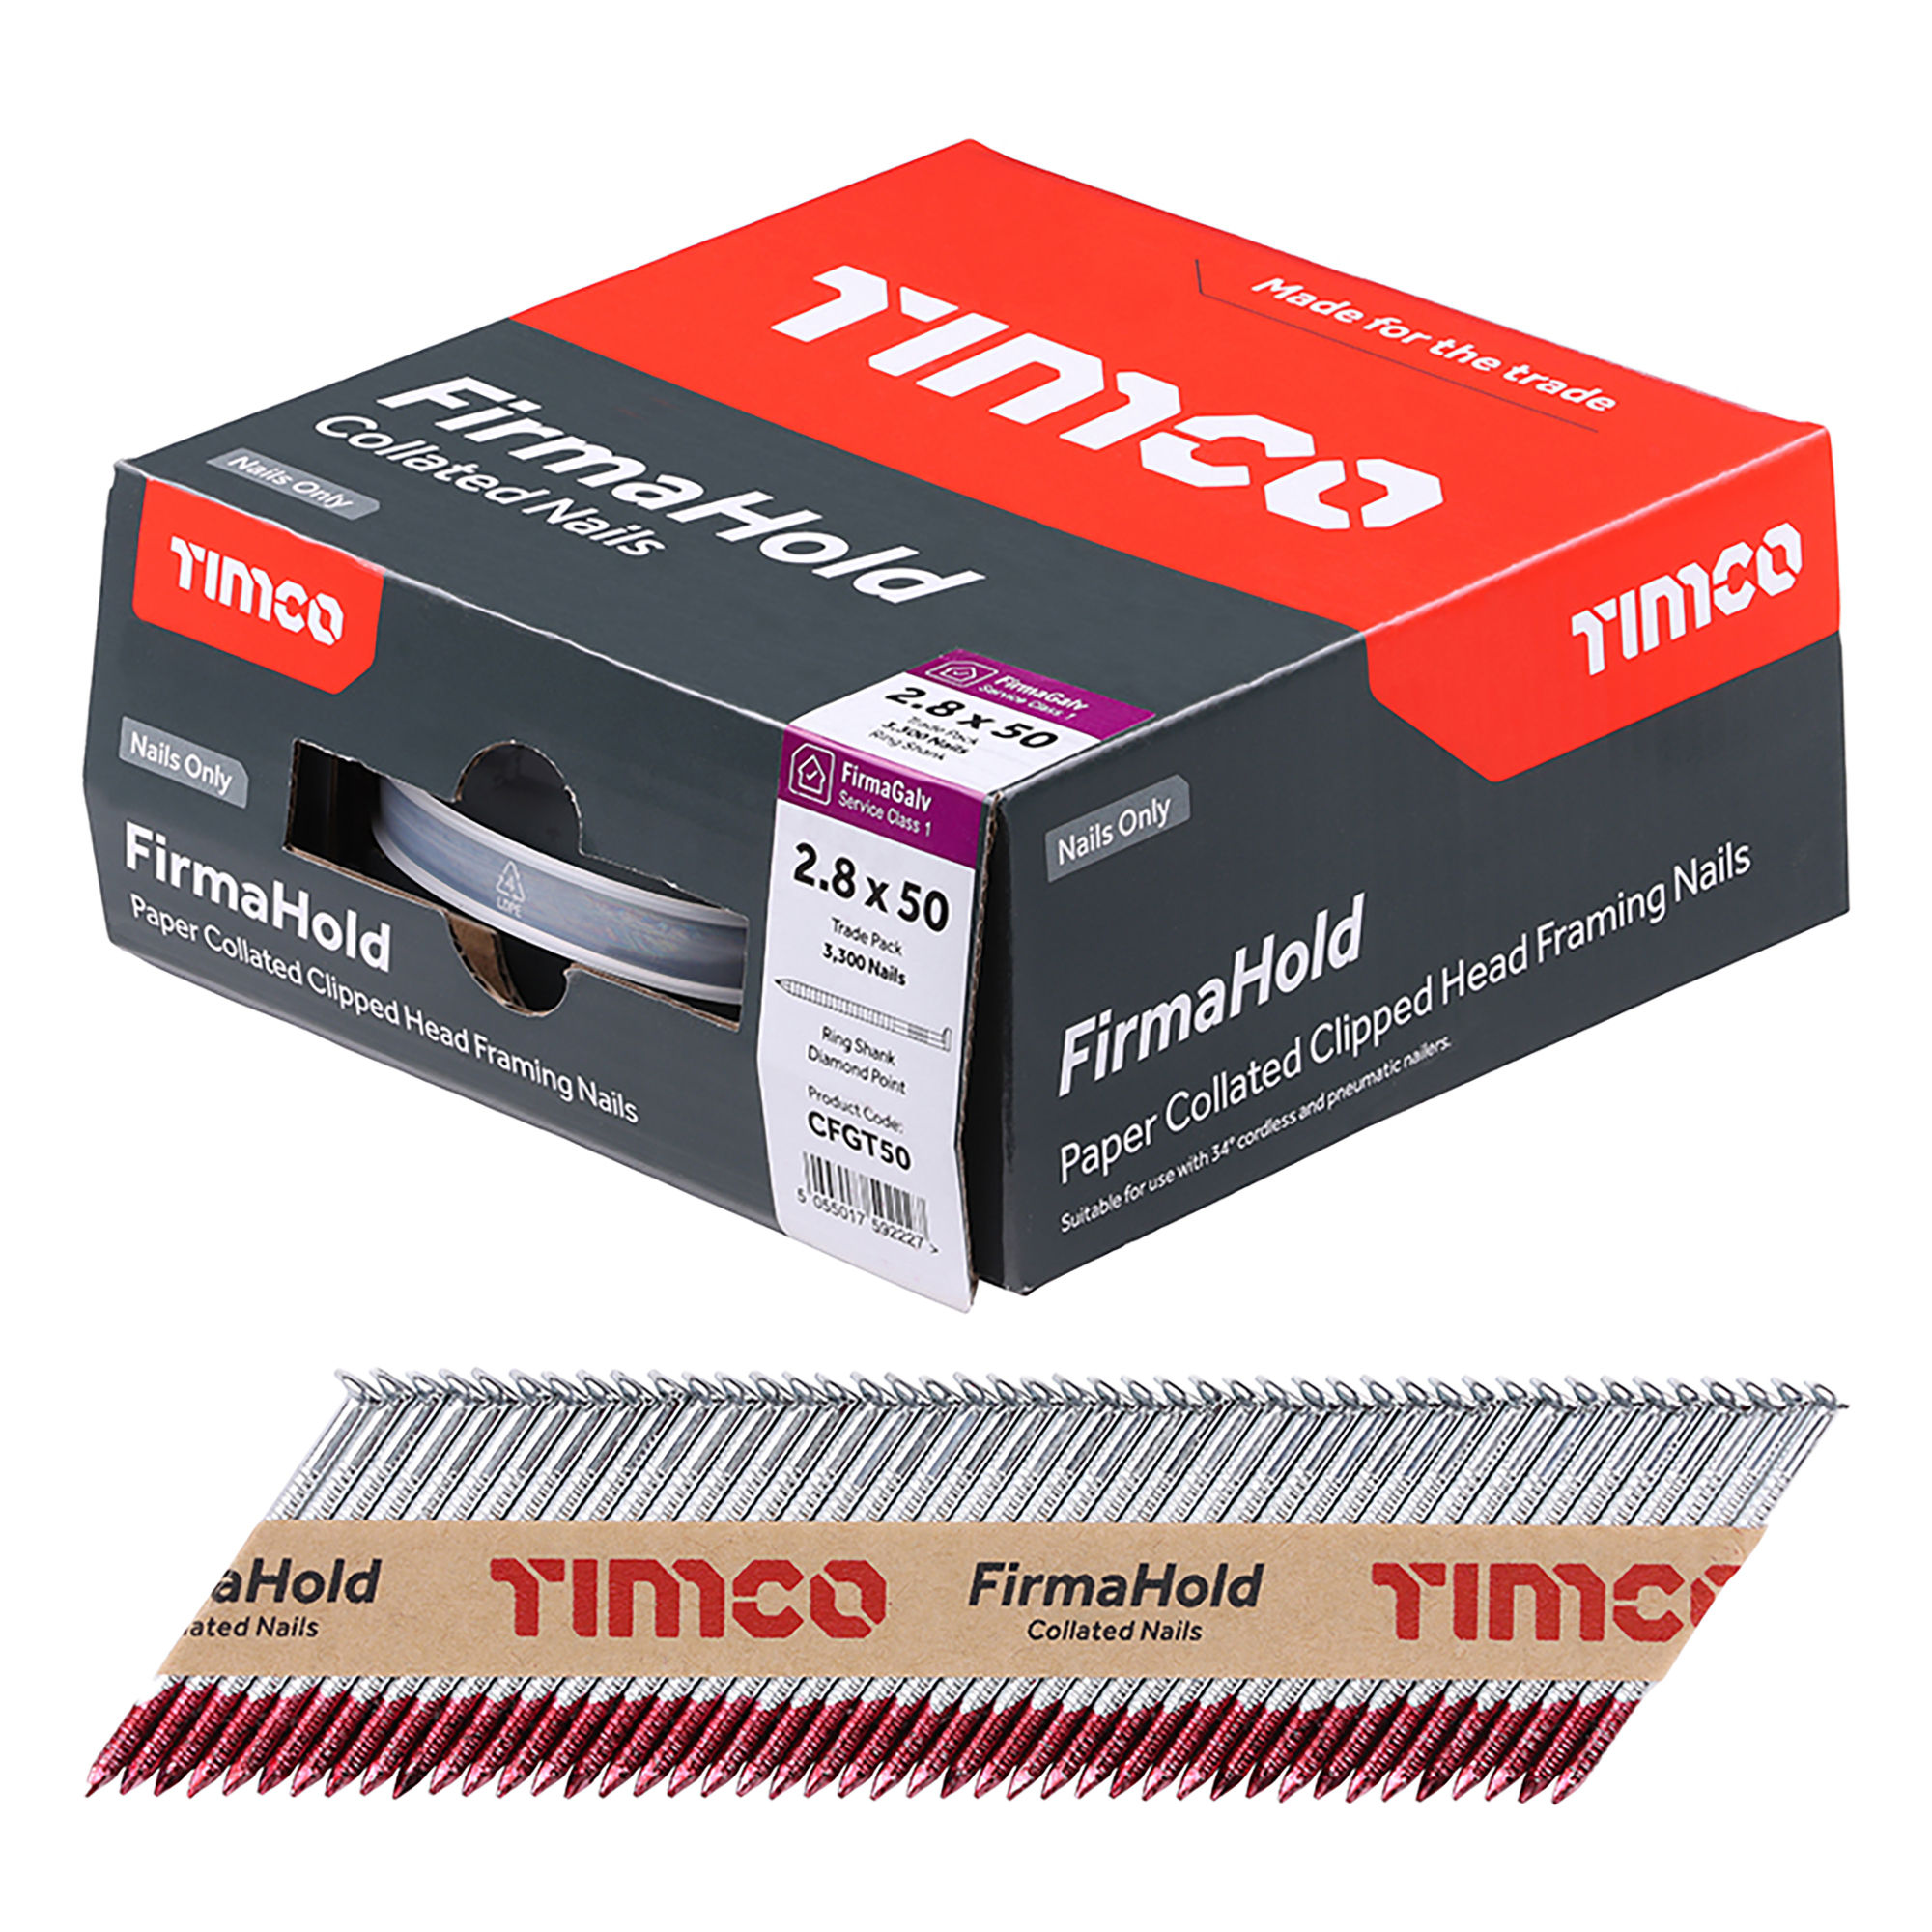 Timco FirmaHold Collated Clipped Head Ring Shank Nails (Box of 3300) 2.8mm x 50mm - CFGT50